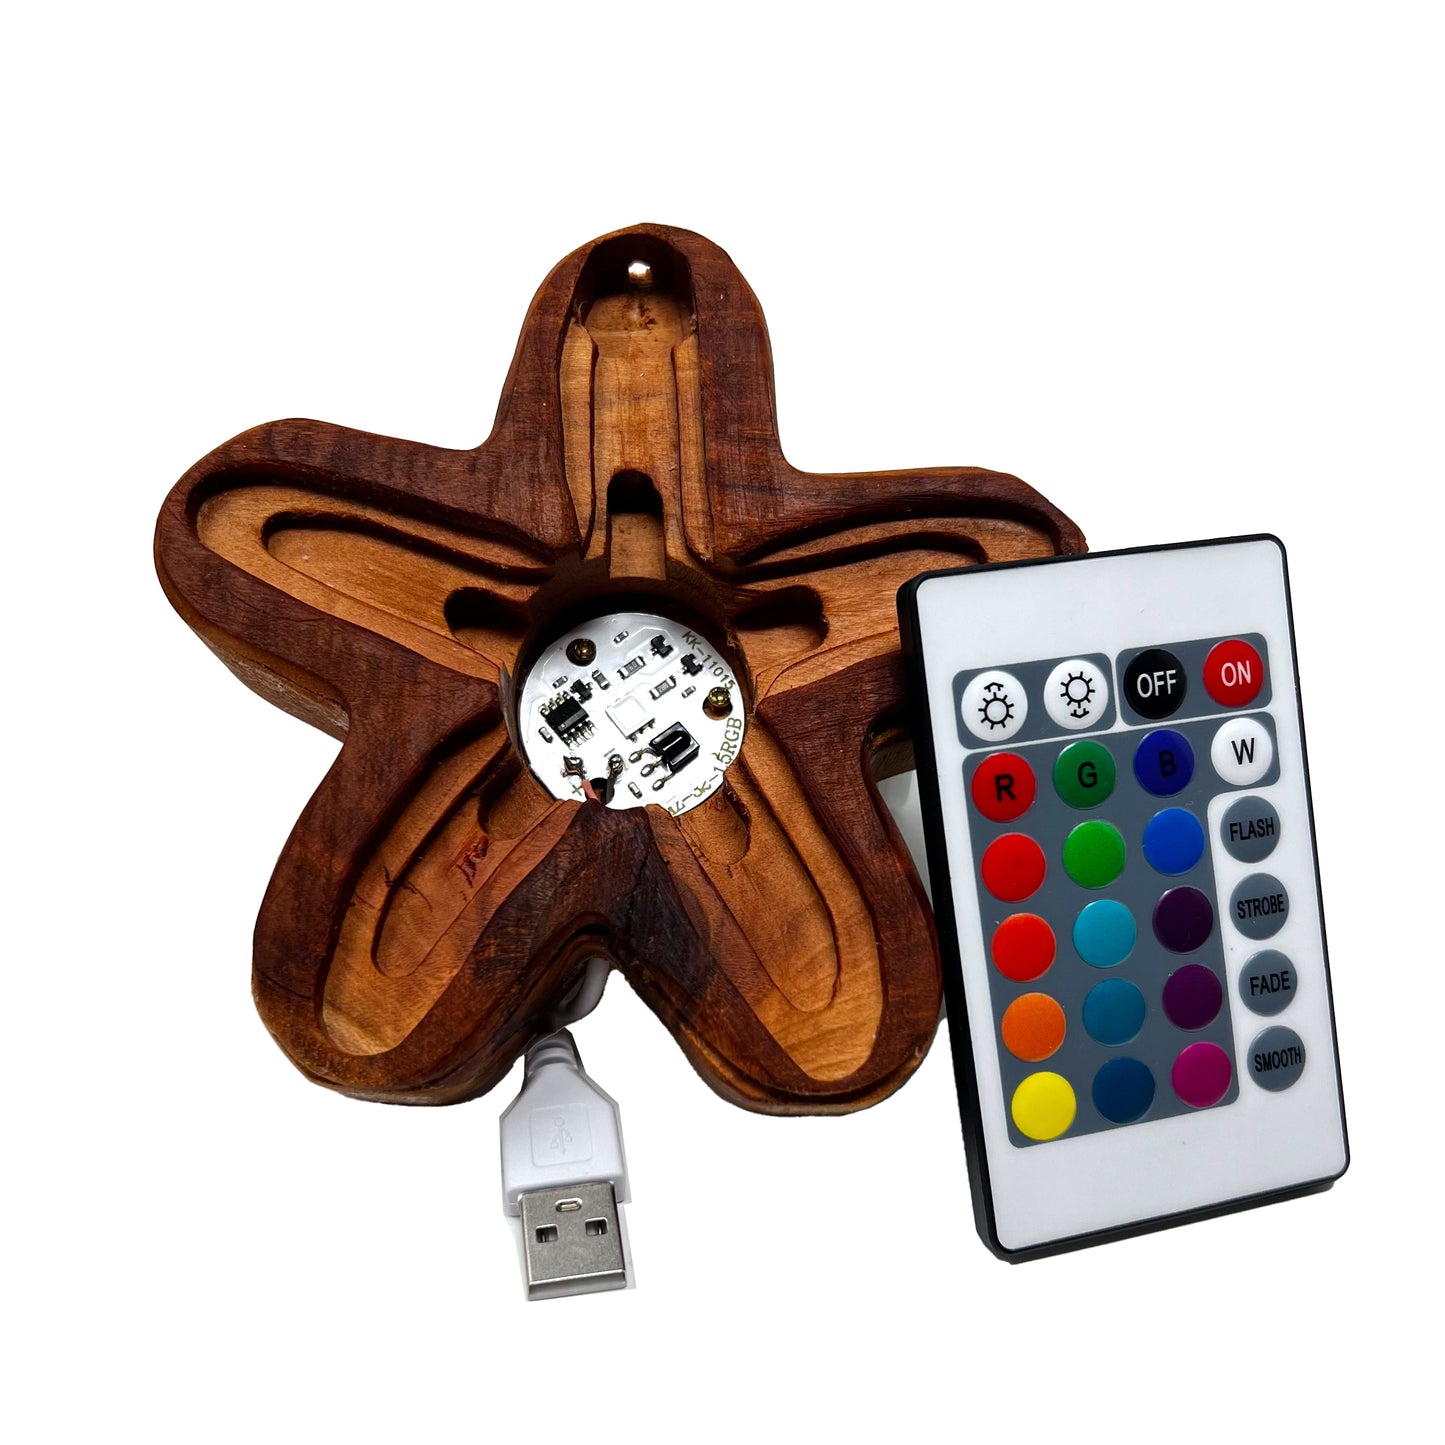 studioTica Glass Starfish Wood Base with Personalized Engraving and Light